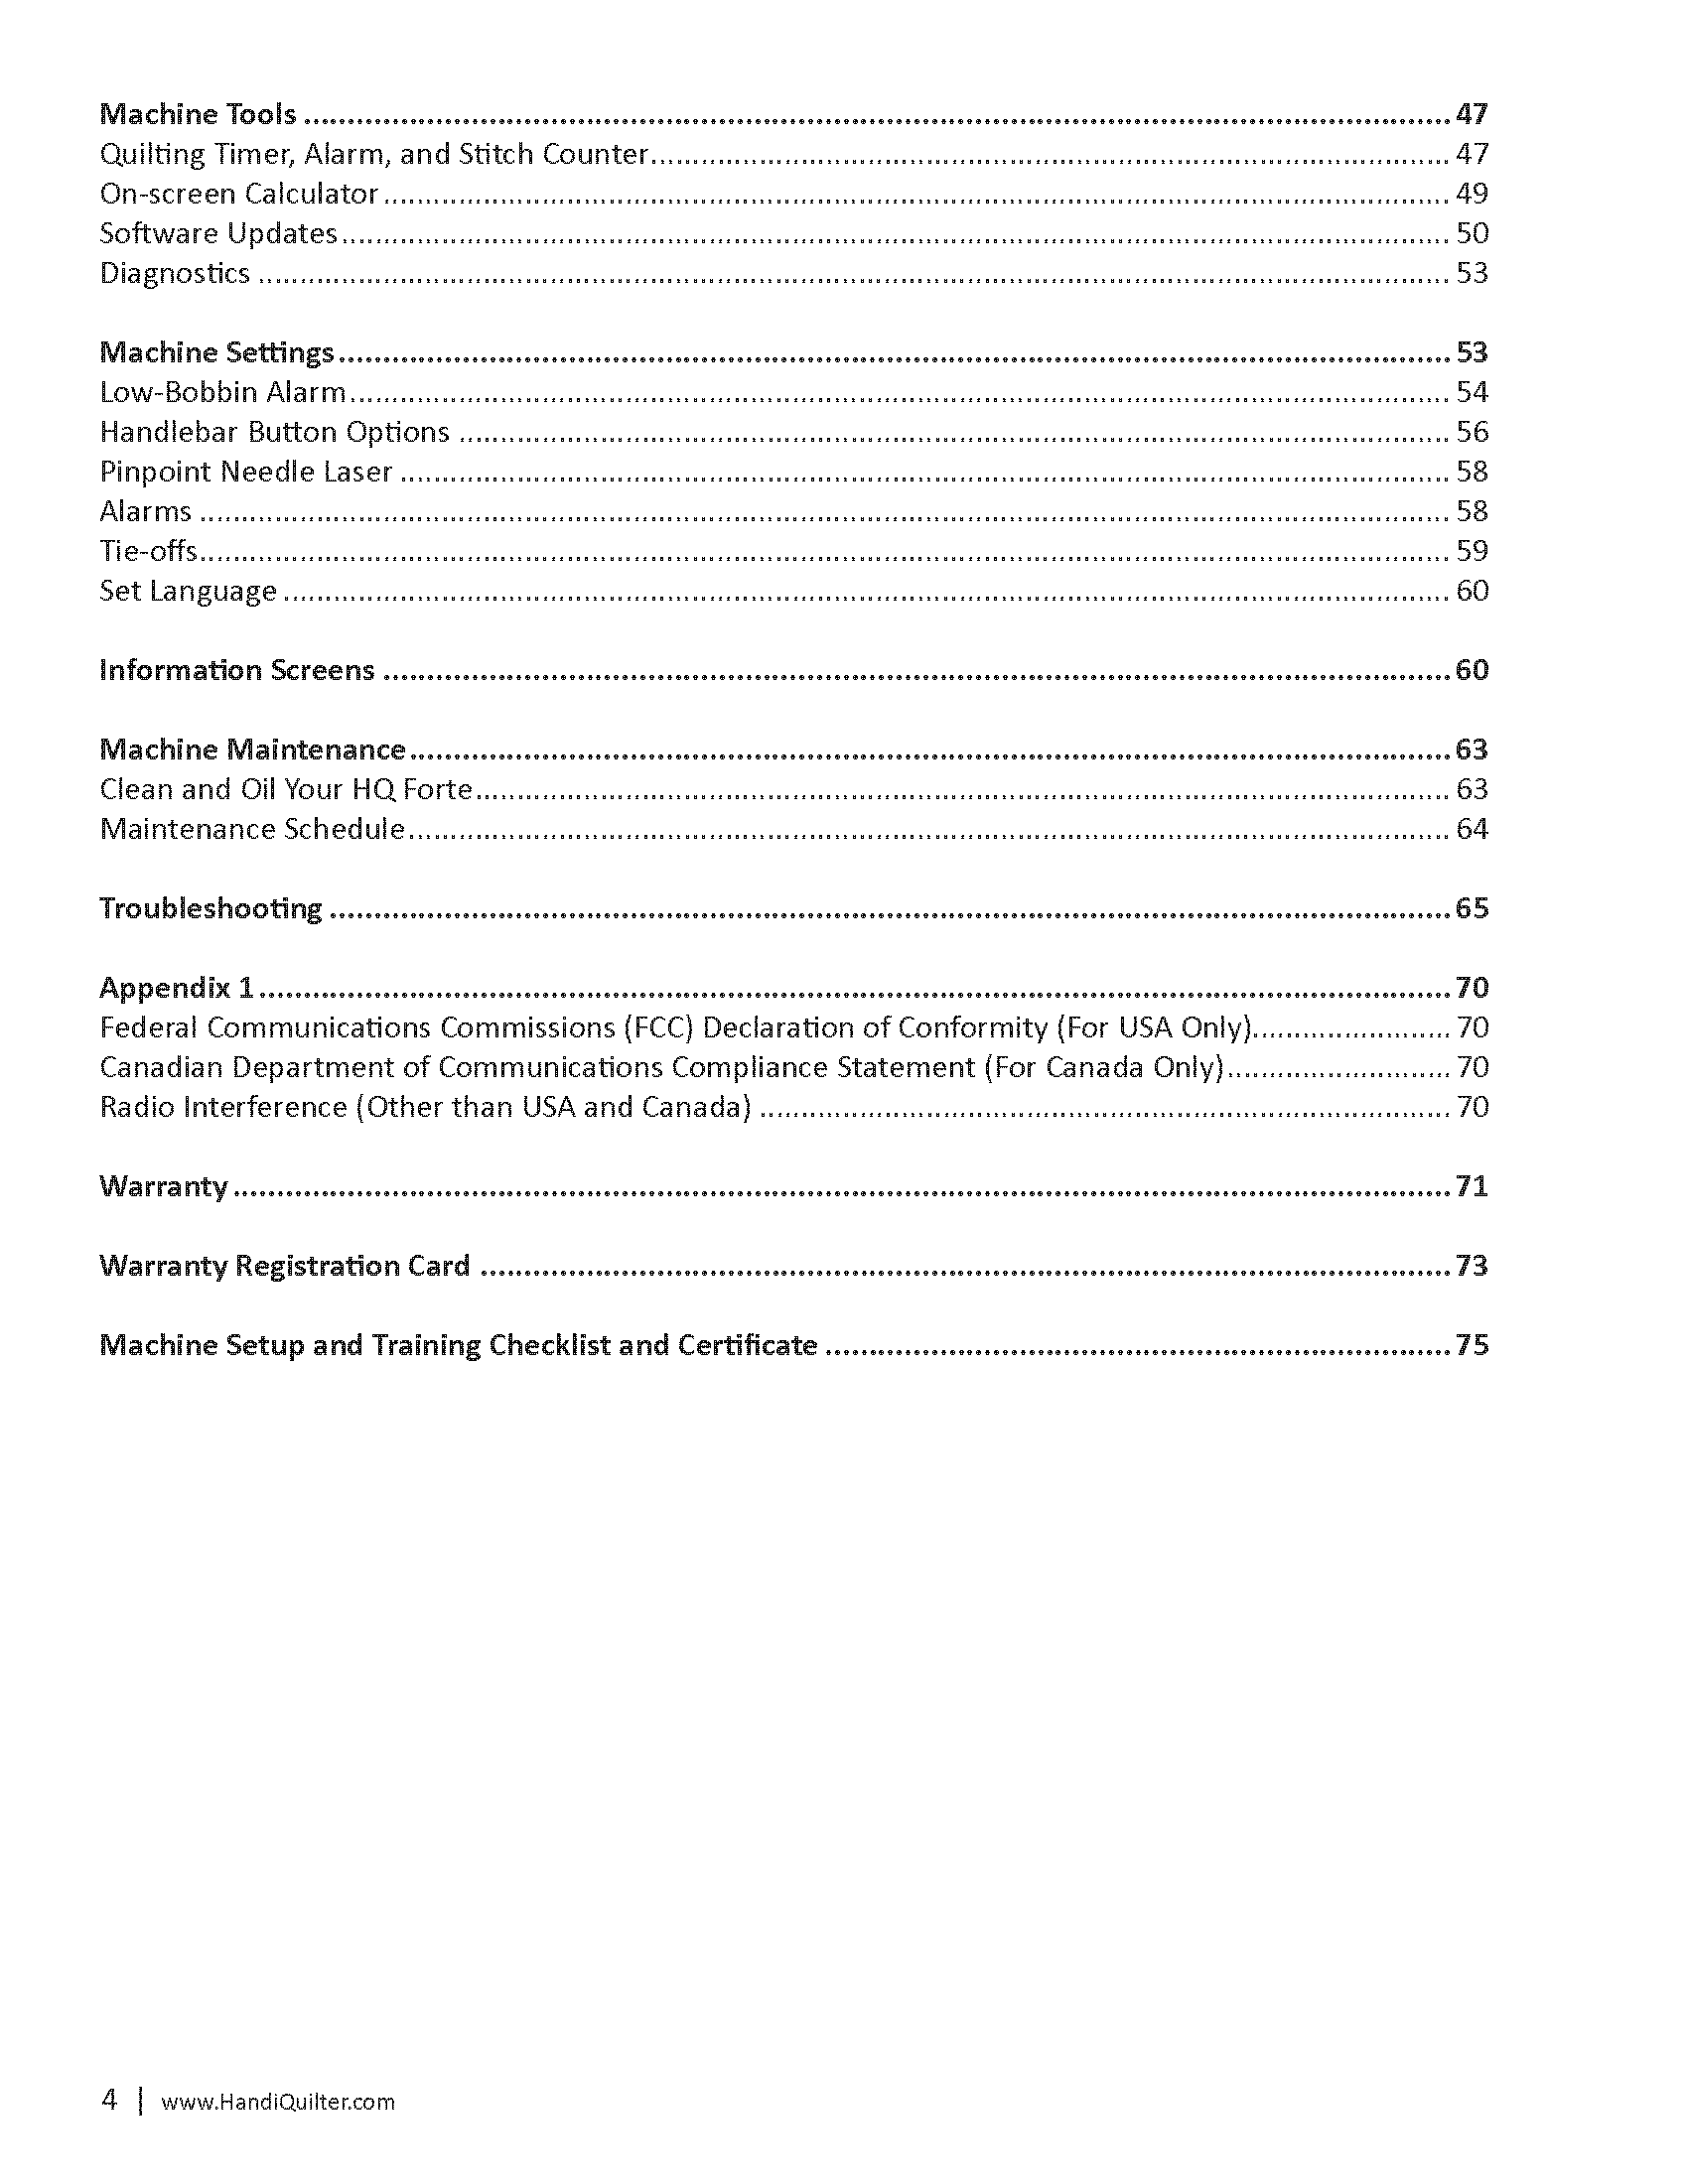 HQ-Forte-User-Manual-ALL-2_Page_05.png